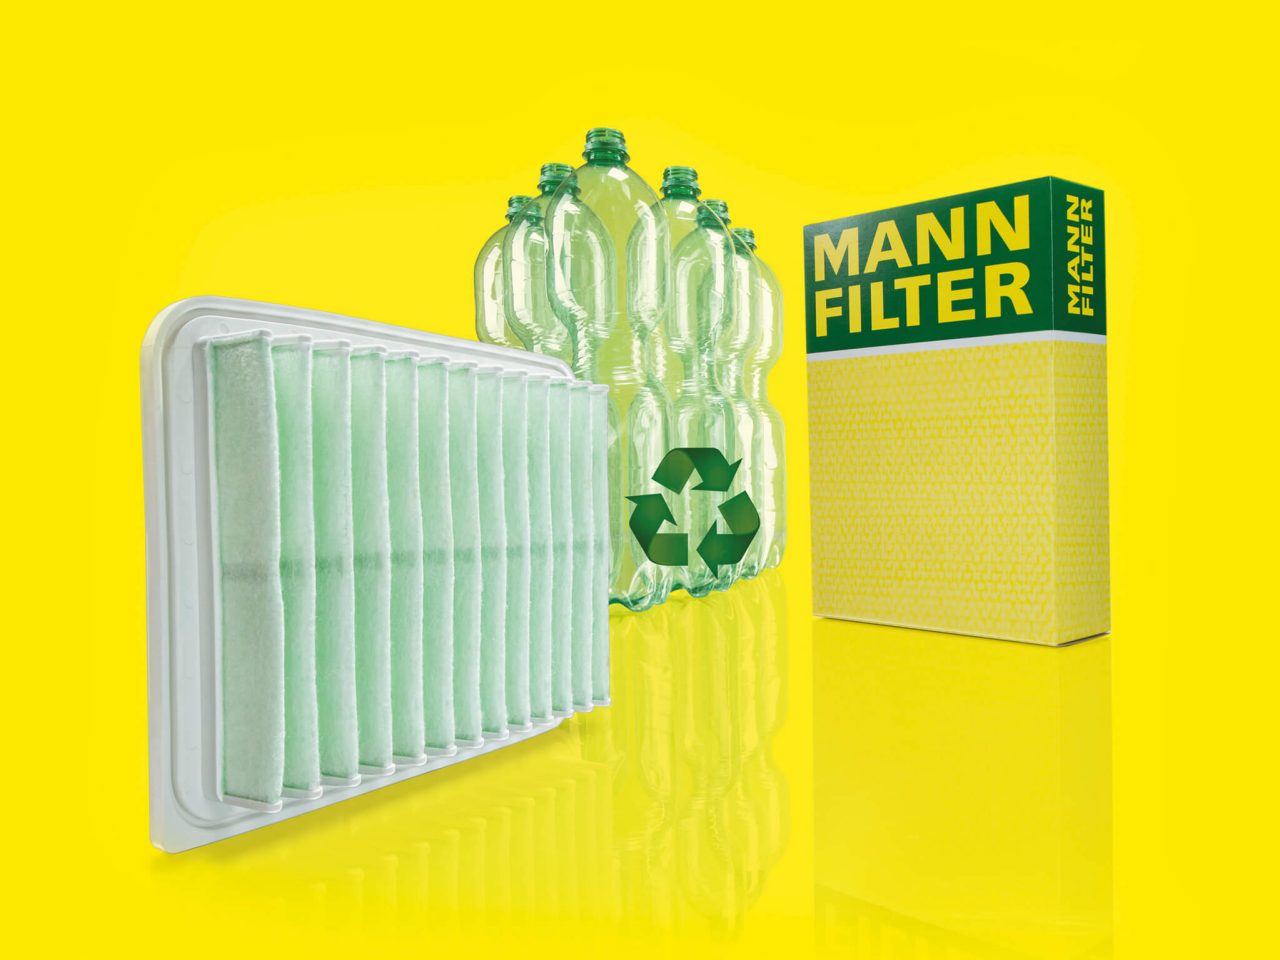 More Fibers in Air Filters from